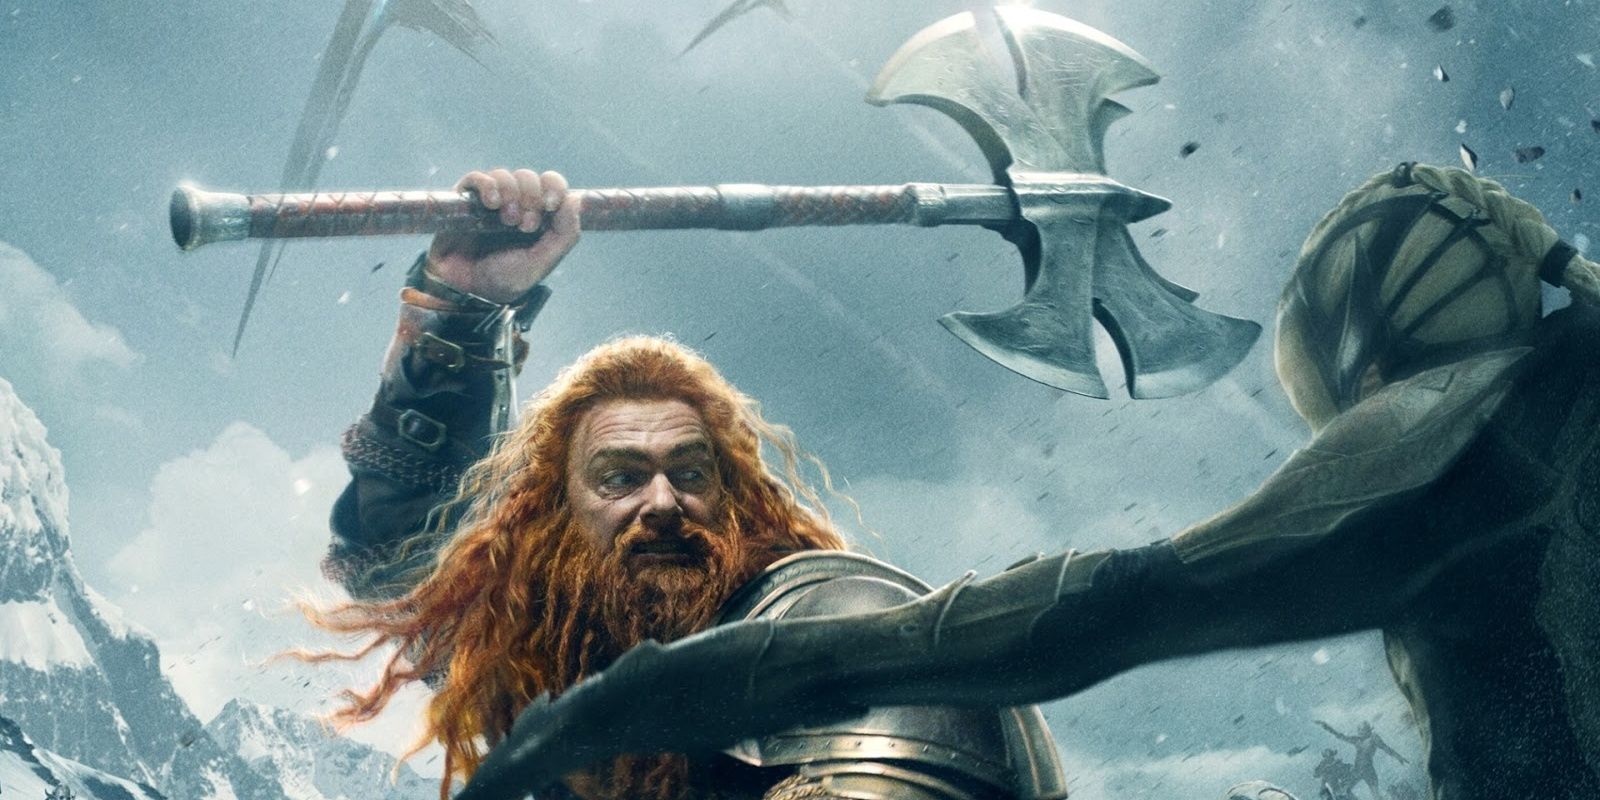 Volstagg swinging his axe in Thor: The Dark World.